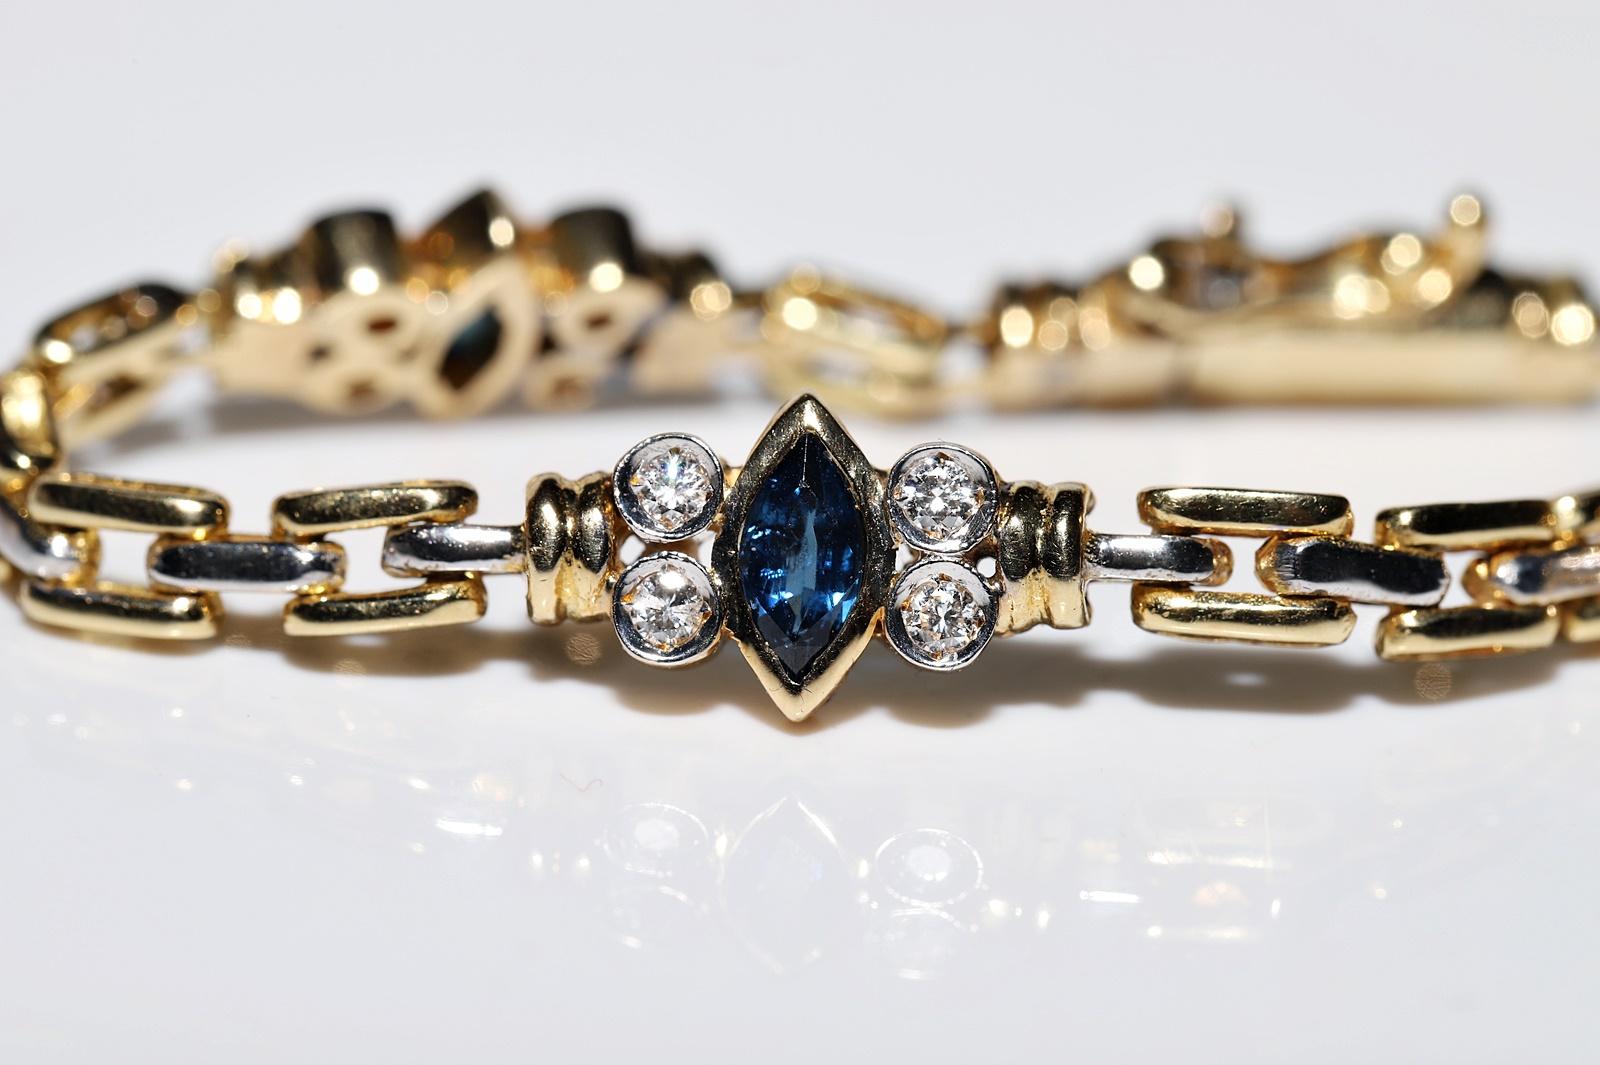 Vintage Circa 1980s 18k Gold Natural Diamond And Sapphire Decorated Bracelet For Sale 3